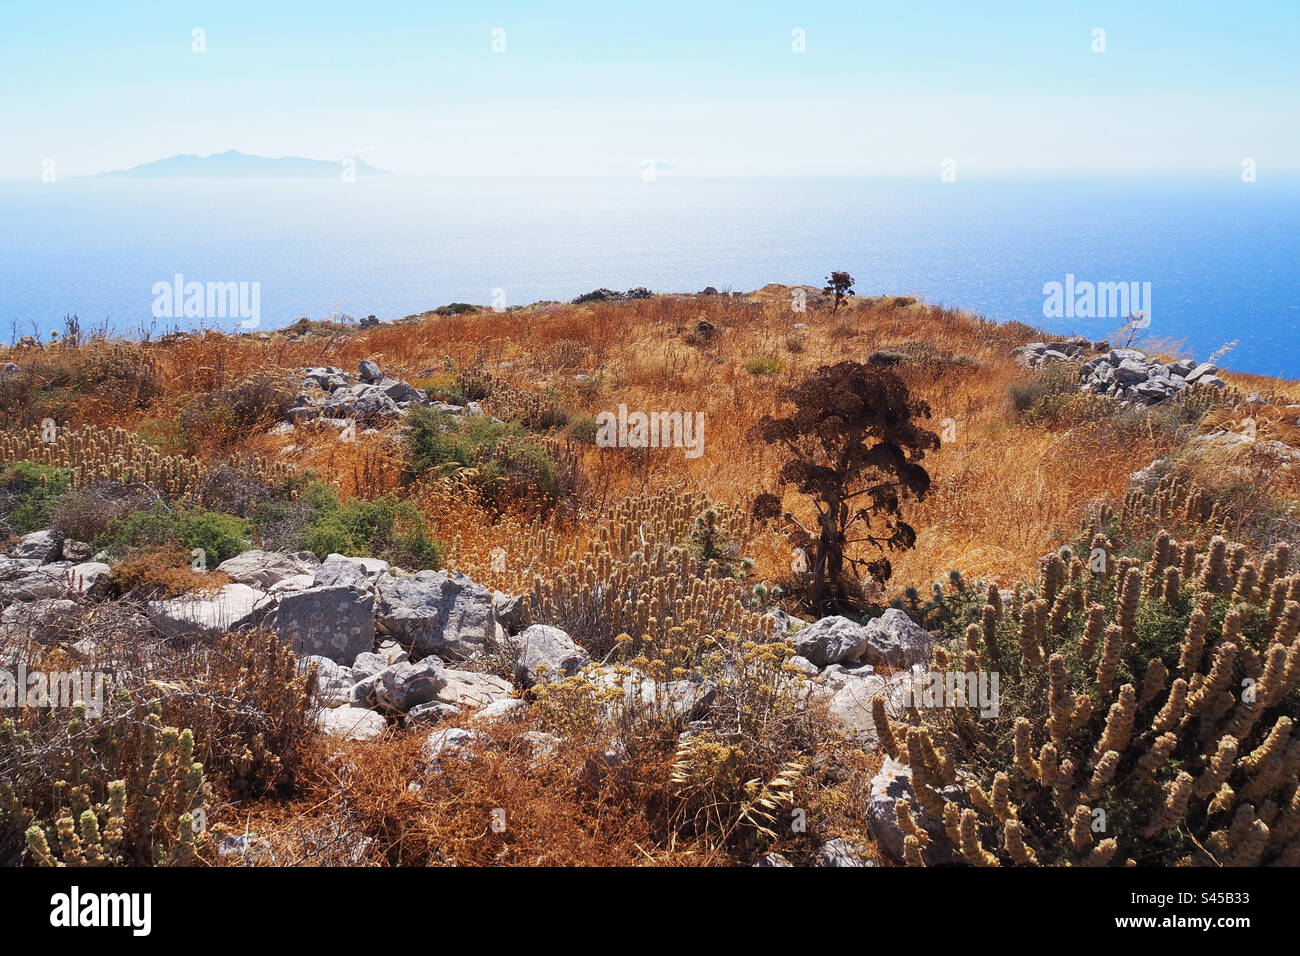 A photo of the ruins of Ancient Thera with the Mediterranean Sea in the background Stock Photo